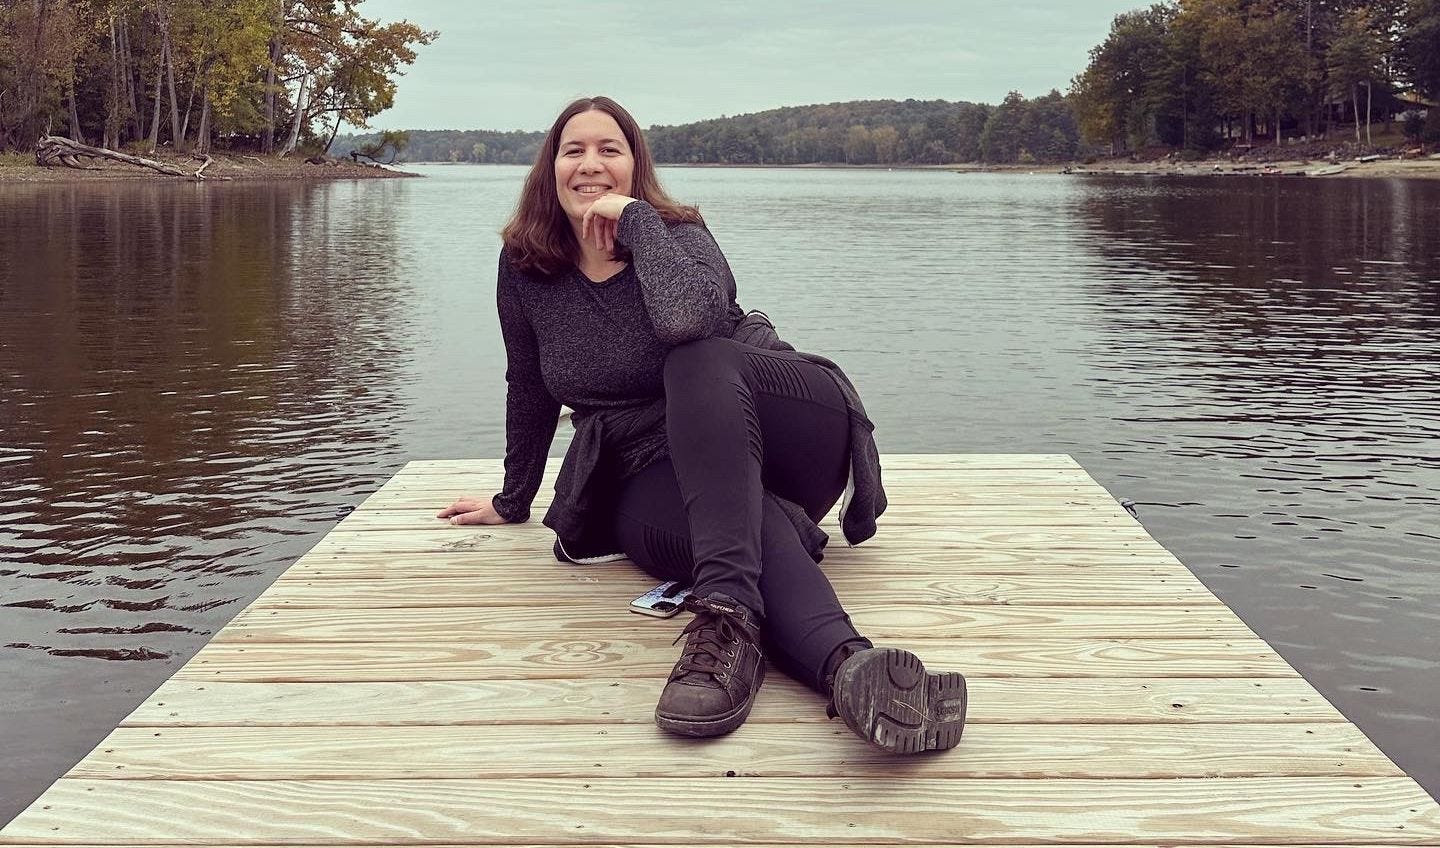 Steph sitting on a pier that juts out over a lake